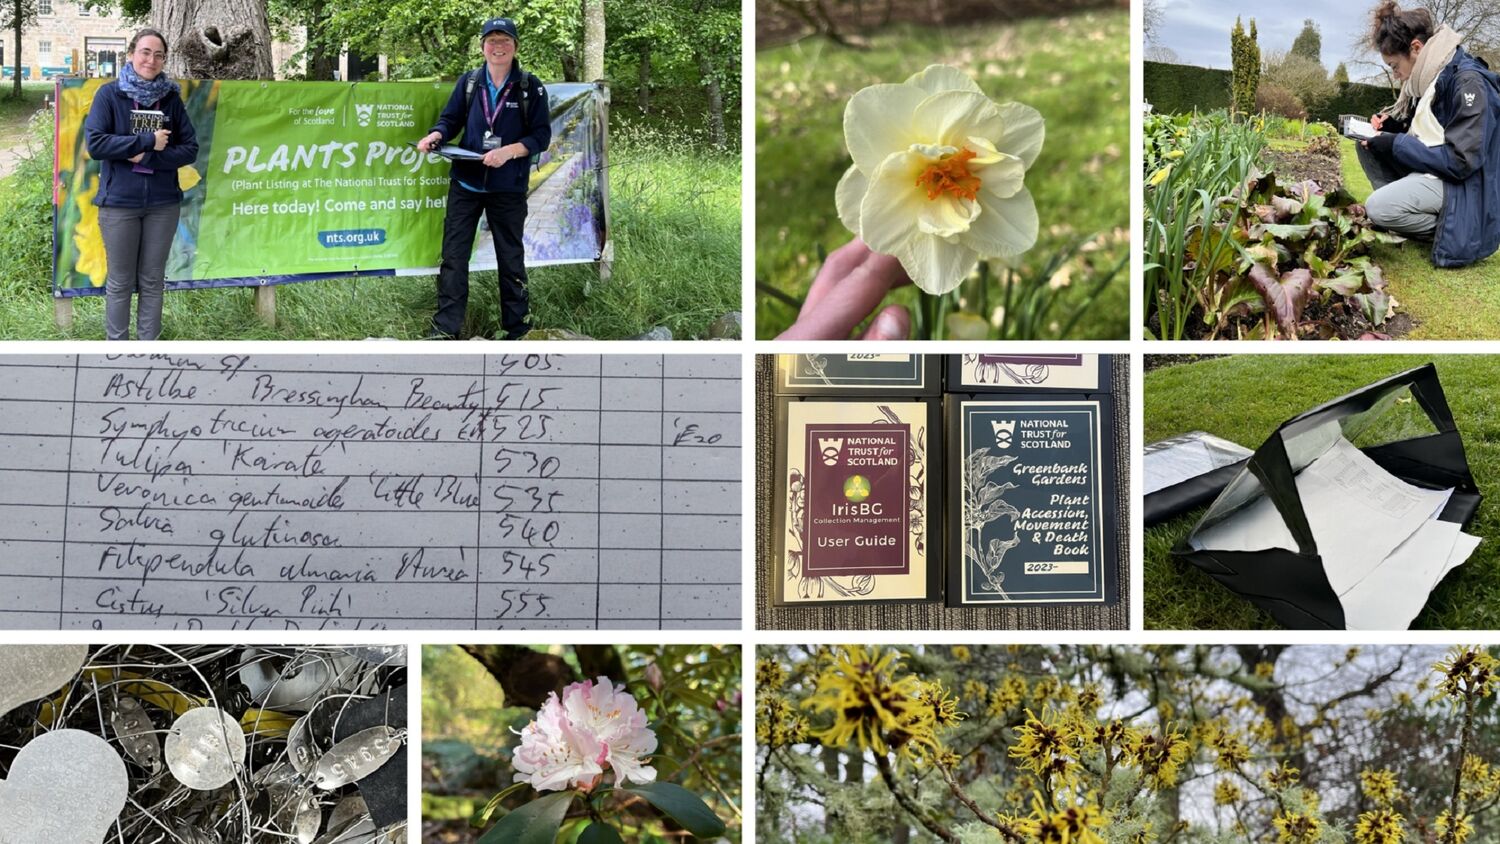 A composite image showing some images of gardens and plants. On the top row, from left to right, are photos of two women by a banner advertising the PLANTS project; a close-up of a daffodil; and a woman kneeling by a flower bed taking notes. On the middle row, from left to right, are an extract from a handwritten plant list; some instruction manuals; and an open waterproof folder containing documents, lying on the lawn. On the bottom row, from left to right, are a close-up of a pile of silver plant tags; a close-up of a pale pink rhododendron flower; and a close-up of a yellow-flowering shrub.